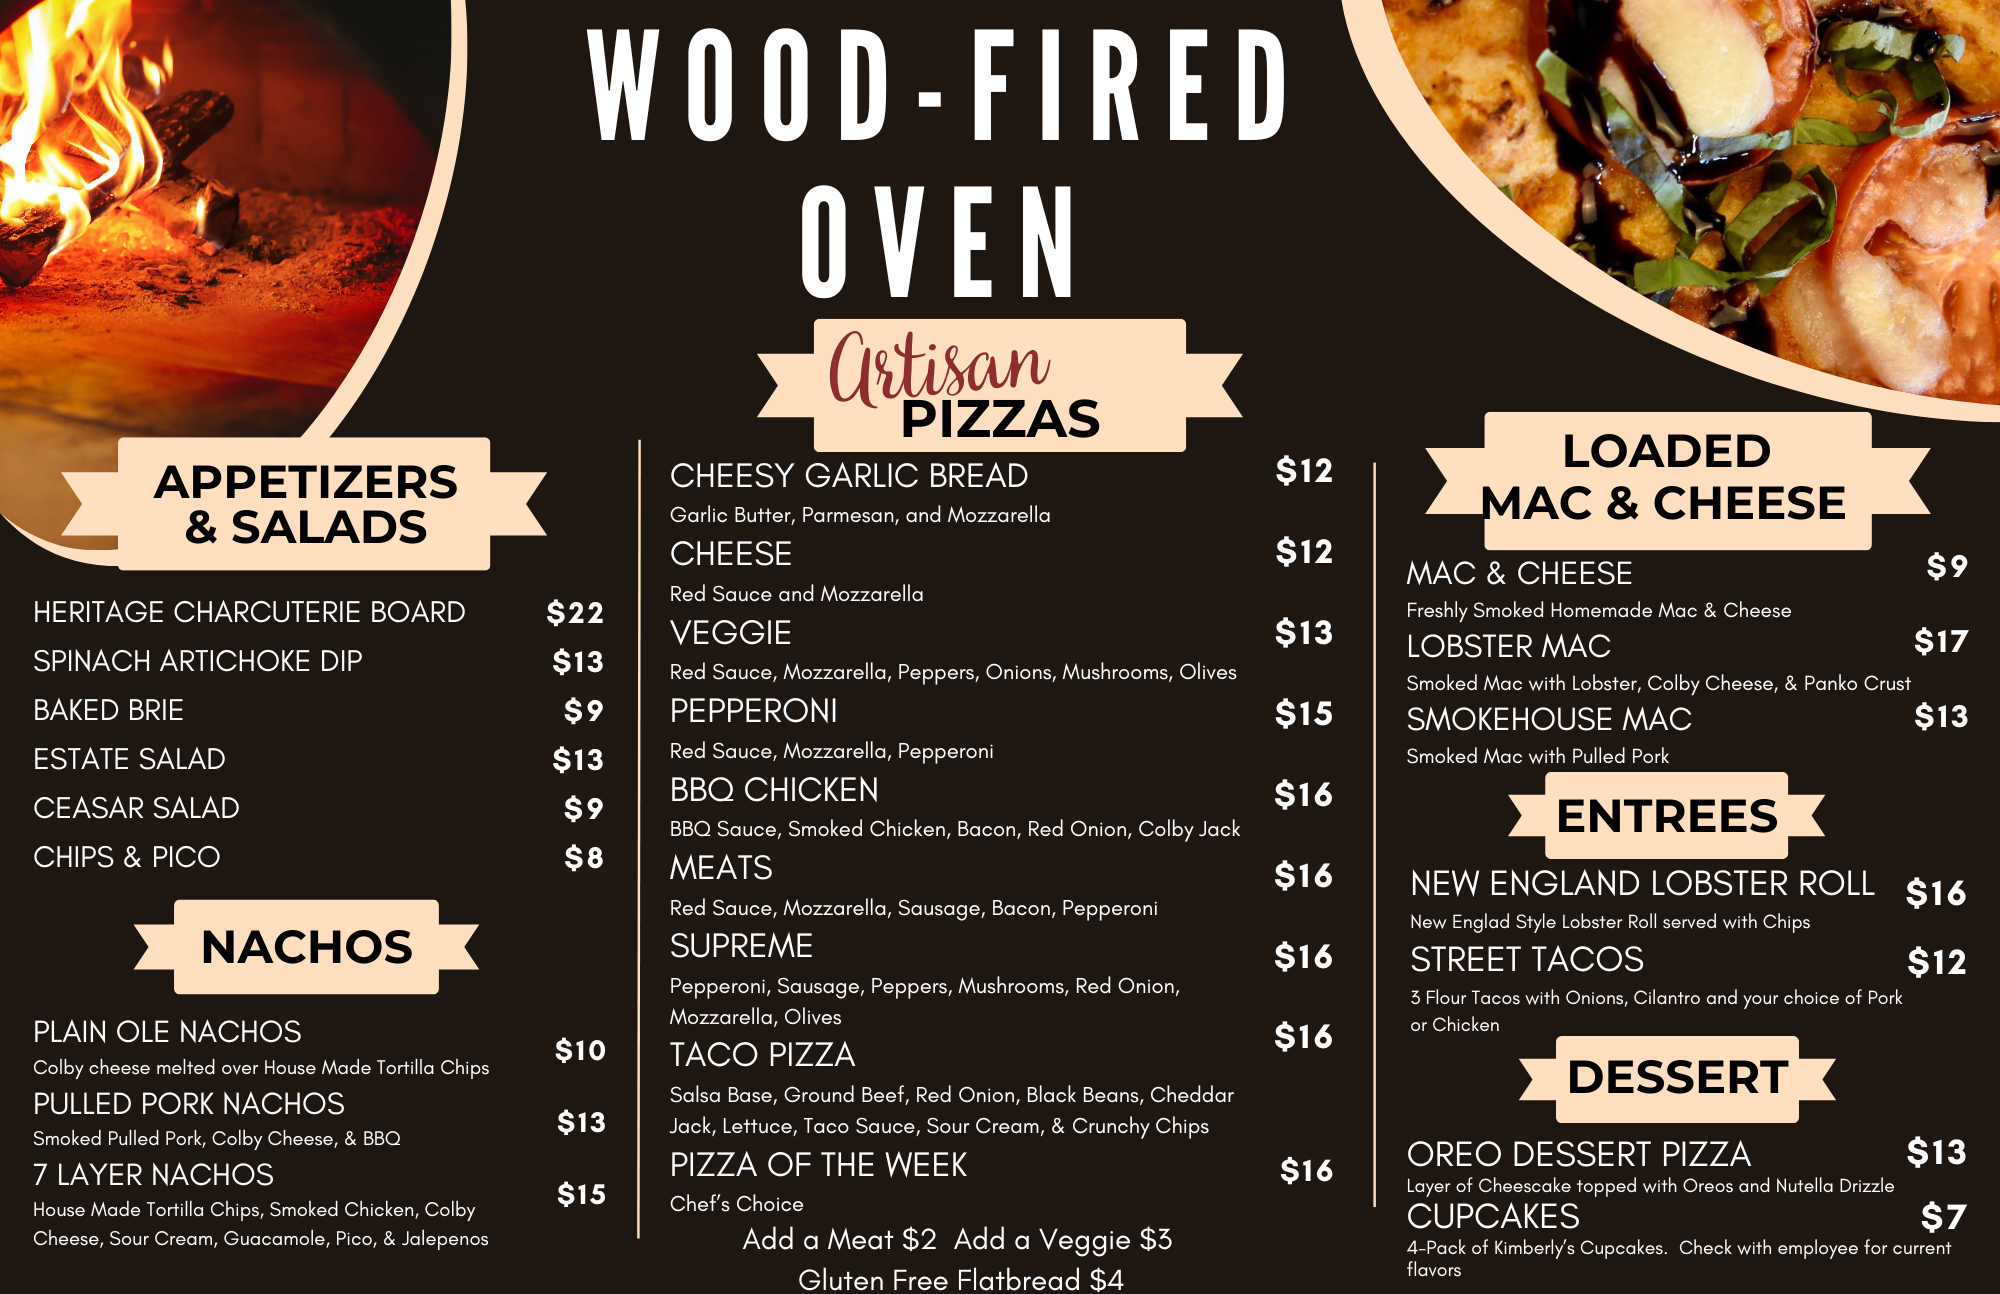 WOOd-Fired Oven with Tacos & Oreo Dessert